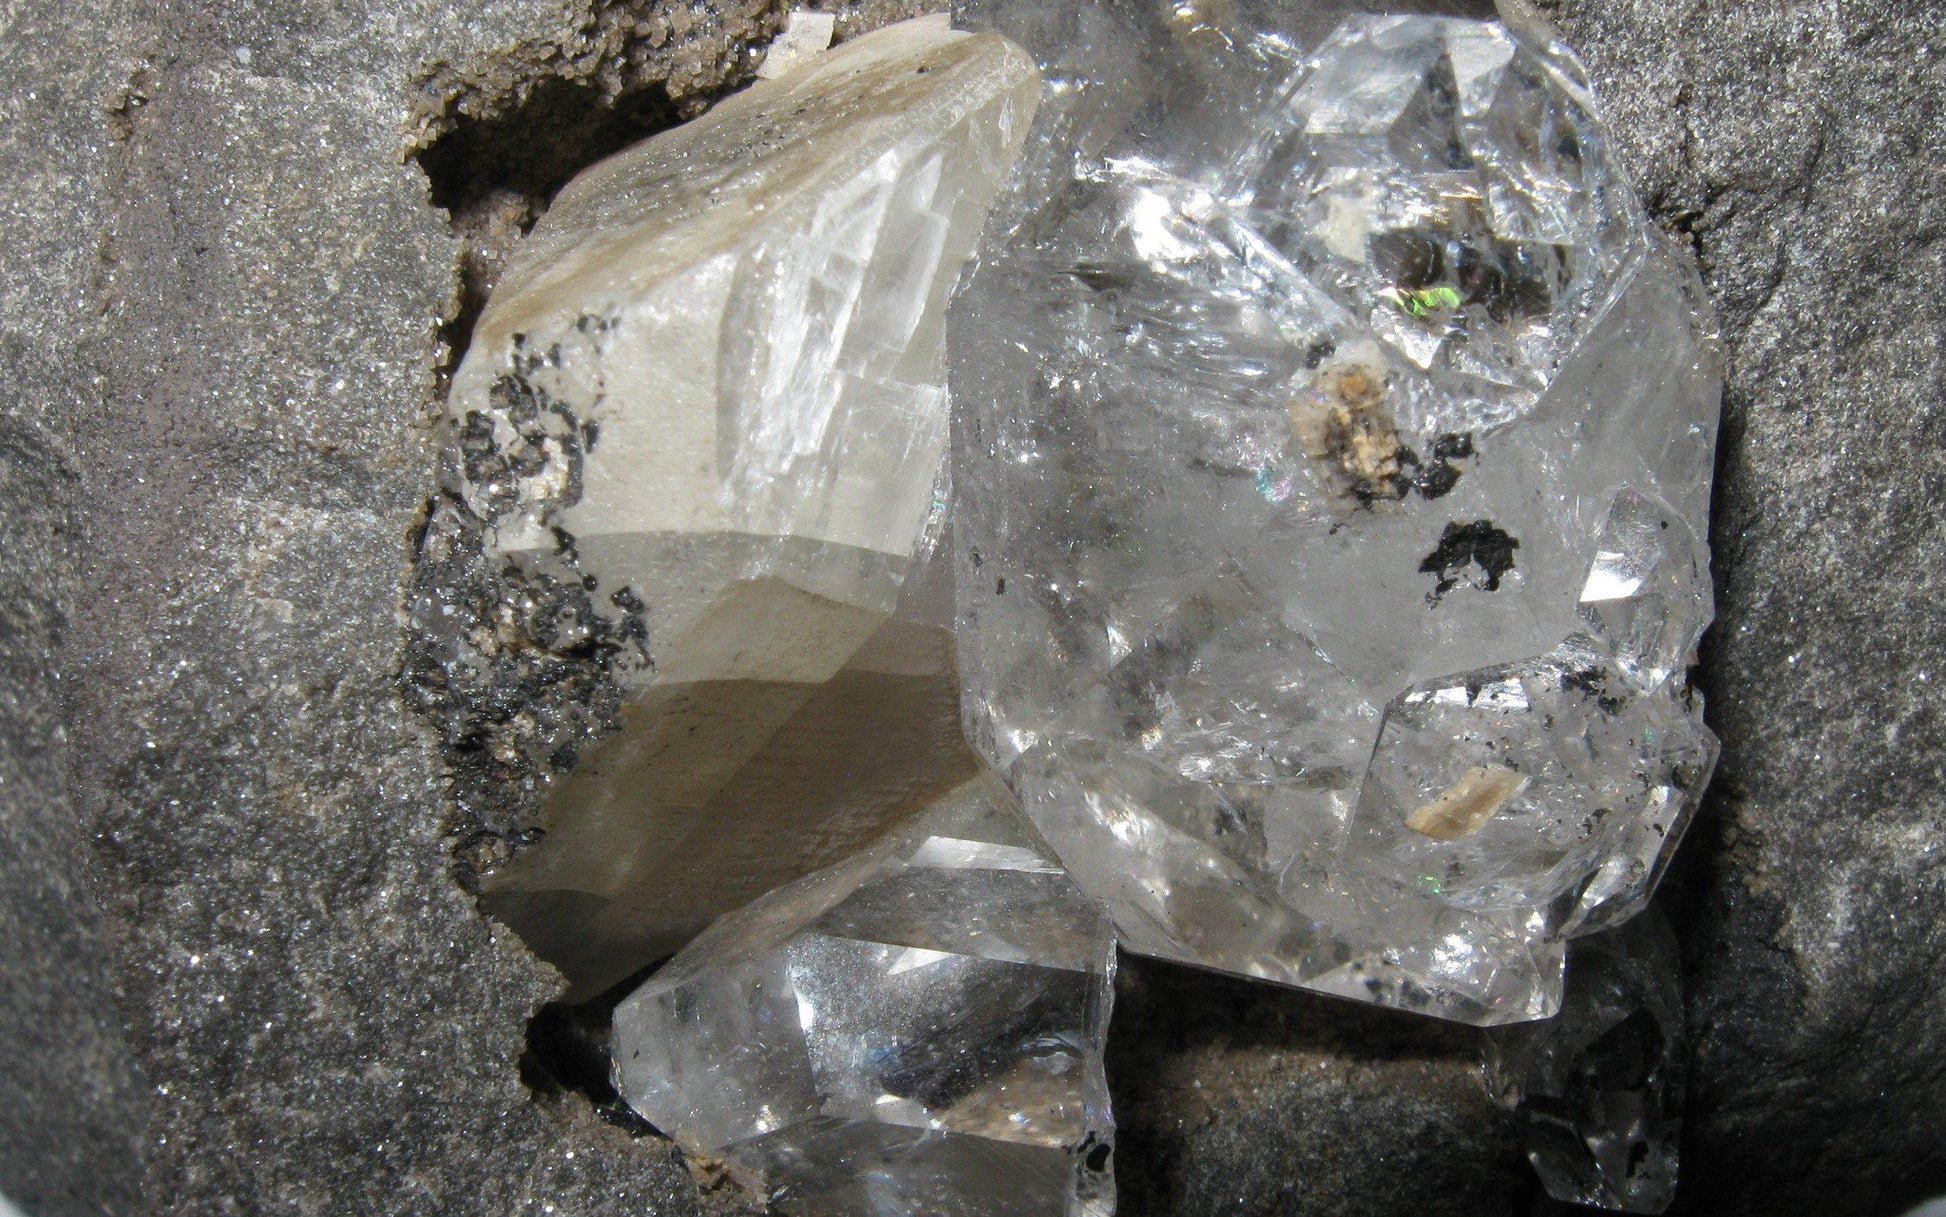 Herkimer Diamond in Matrix w/ Calcite | Of Coins & Crystals